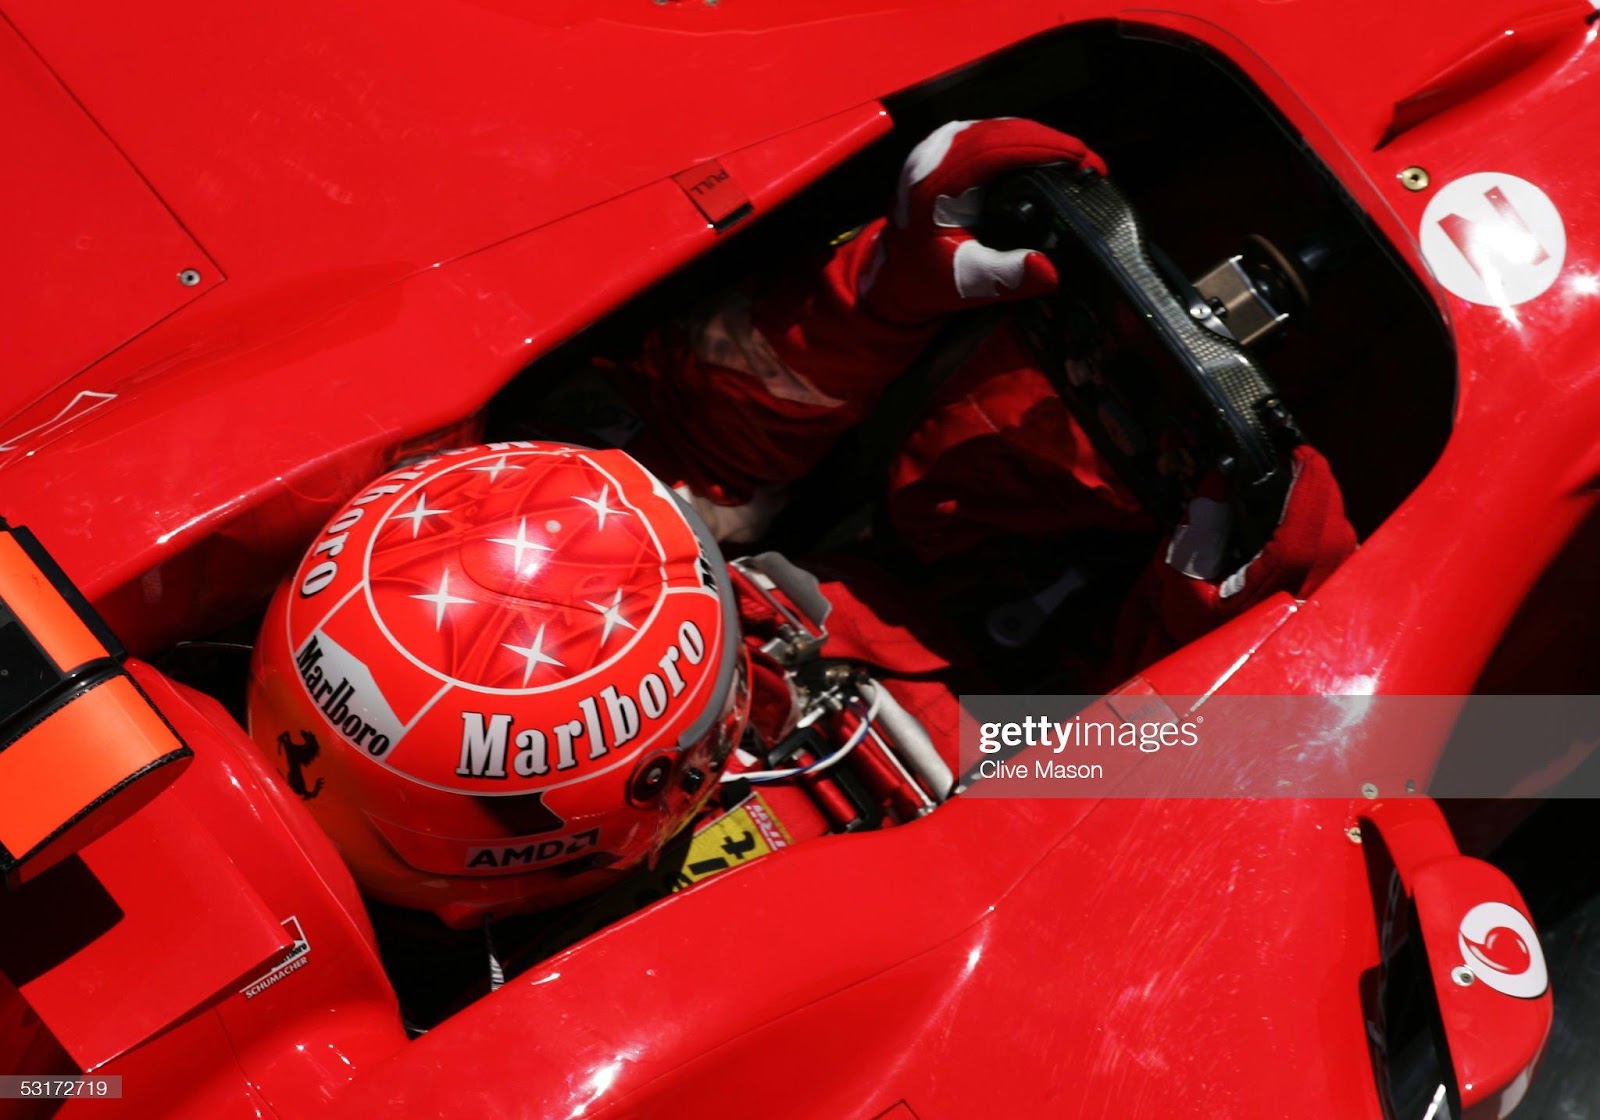 Michael Schumacher, Ferrari, during practice for the F1 Spanish Grand Prix at the Circuit de Catalunya on May 6, 2005 in Barcelona, Spain.